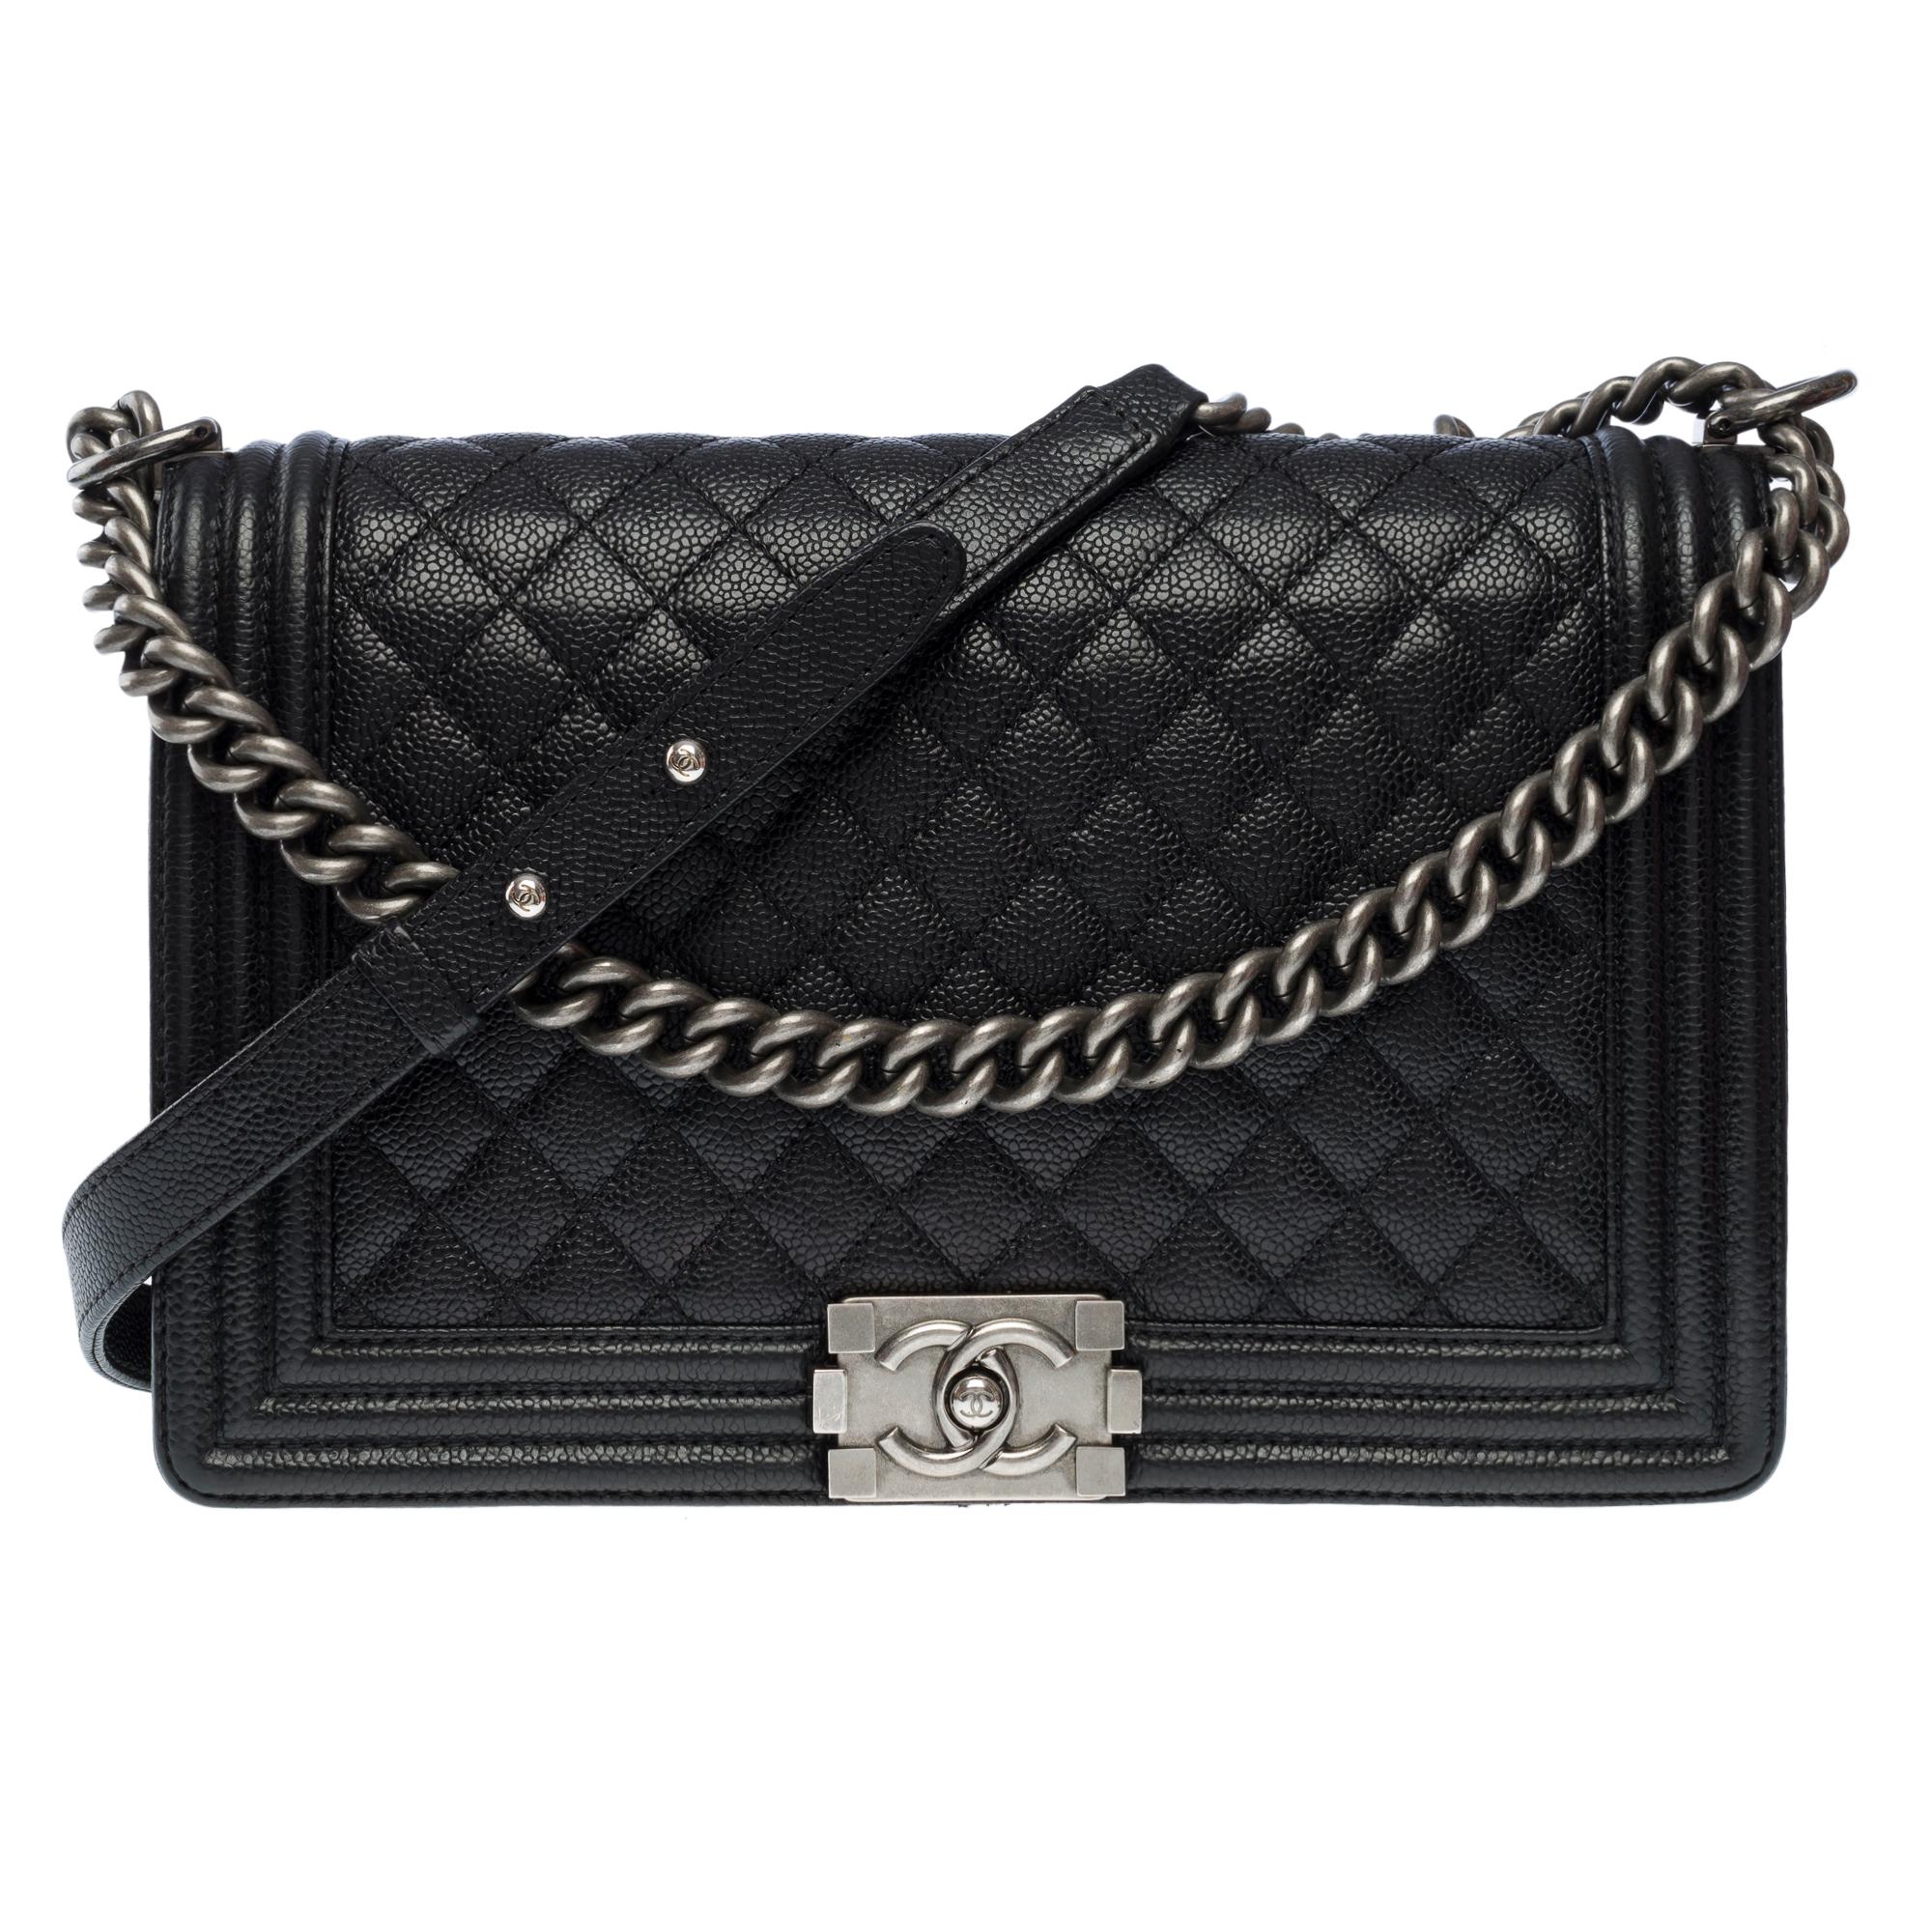 Chanel​ ​Boy​ ​New​ ​Medium​ ​28​ ​cm​ ​shoulder​ ​bag​ ​in​ ​black​ ​quilted​ ​caviar​ ​leather,​ ​ruthenium​ ​metal​ ​trim,​ ​an​ ​adjustable​ ​chain​ ​handle​ ​in​ ​silver​ ​metal​ ​allowing​ ​a​ ​shoulder​ ​or​ ​crossbody​ ​carry

A​ ​ruthenium​